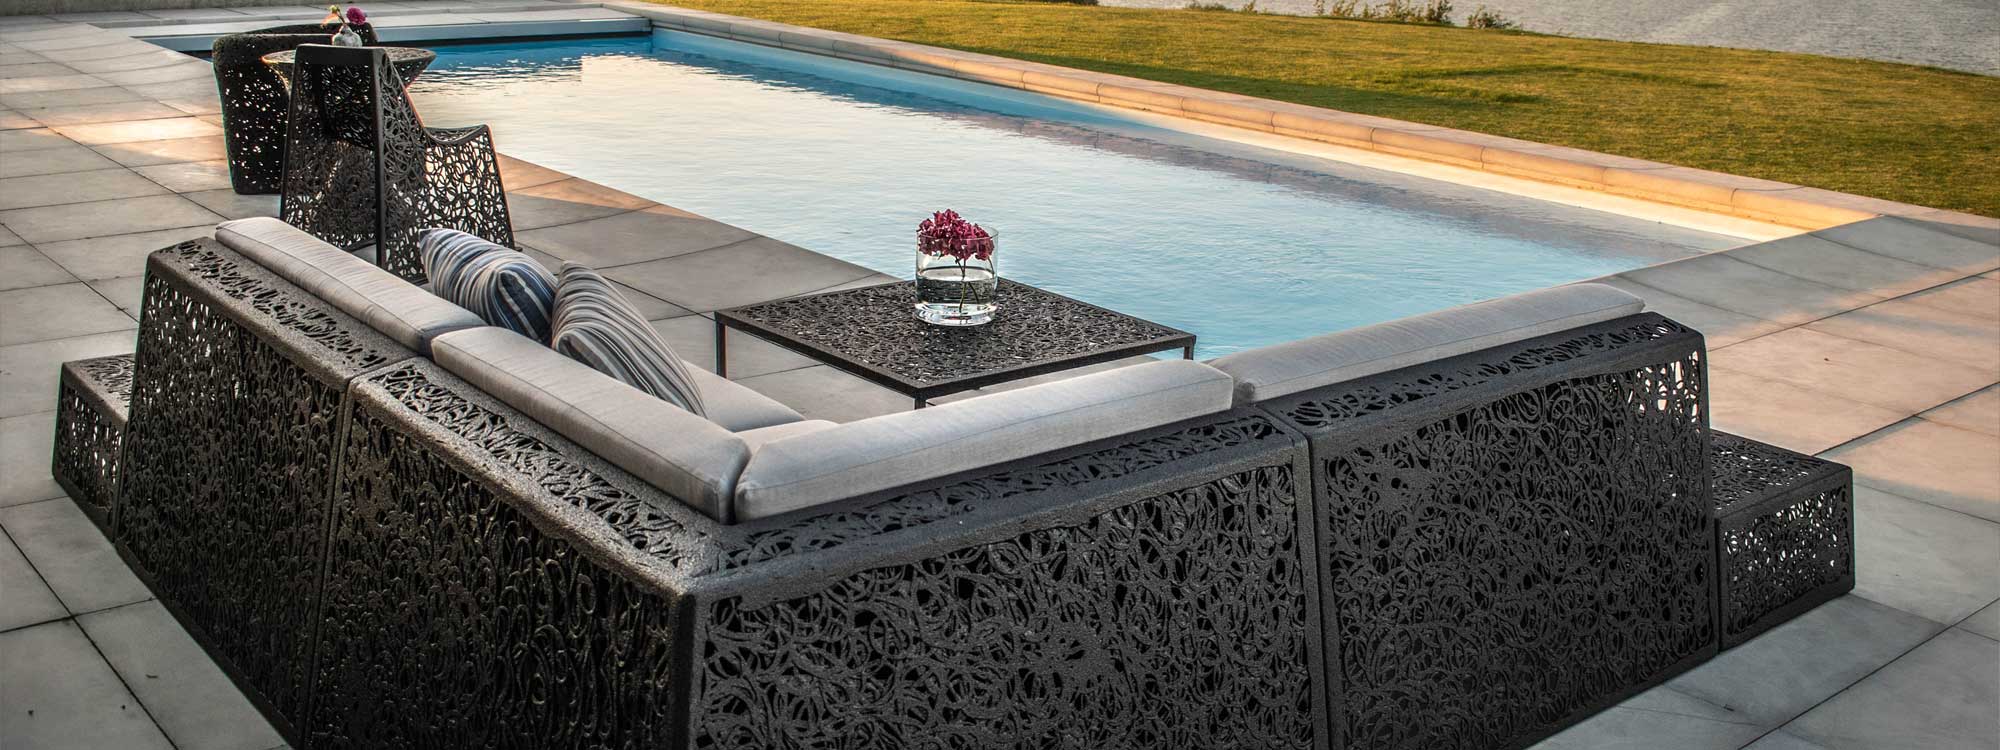 Image from back of Bios Lounge garden corner sofa by Unknown Nordic with swimming pool in background, showing the hand-made basalt fiber structure of the furniture